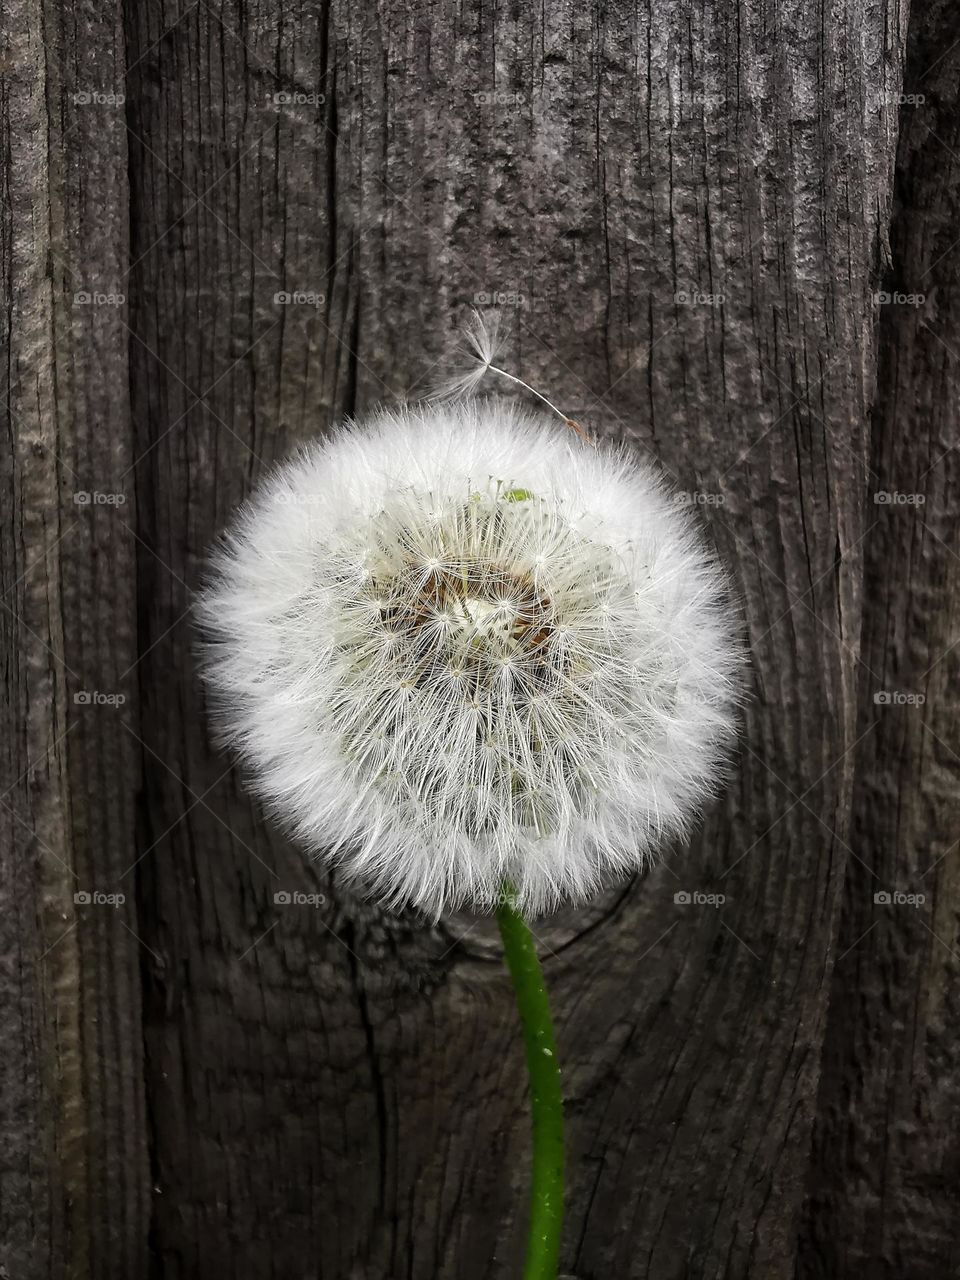 There are so many plants around us. Nature is diverse and beautiful, you just need to notice and protect it. For example, this lonely dandelion, against the backdrop of a gloomy fence, isn't it beautiful?